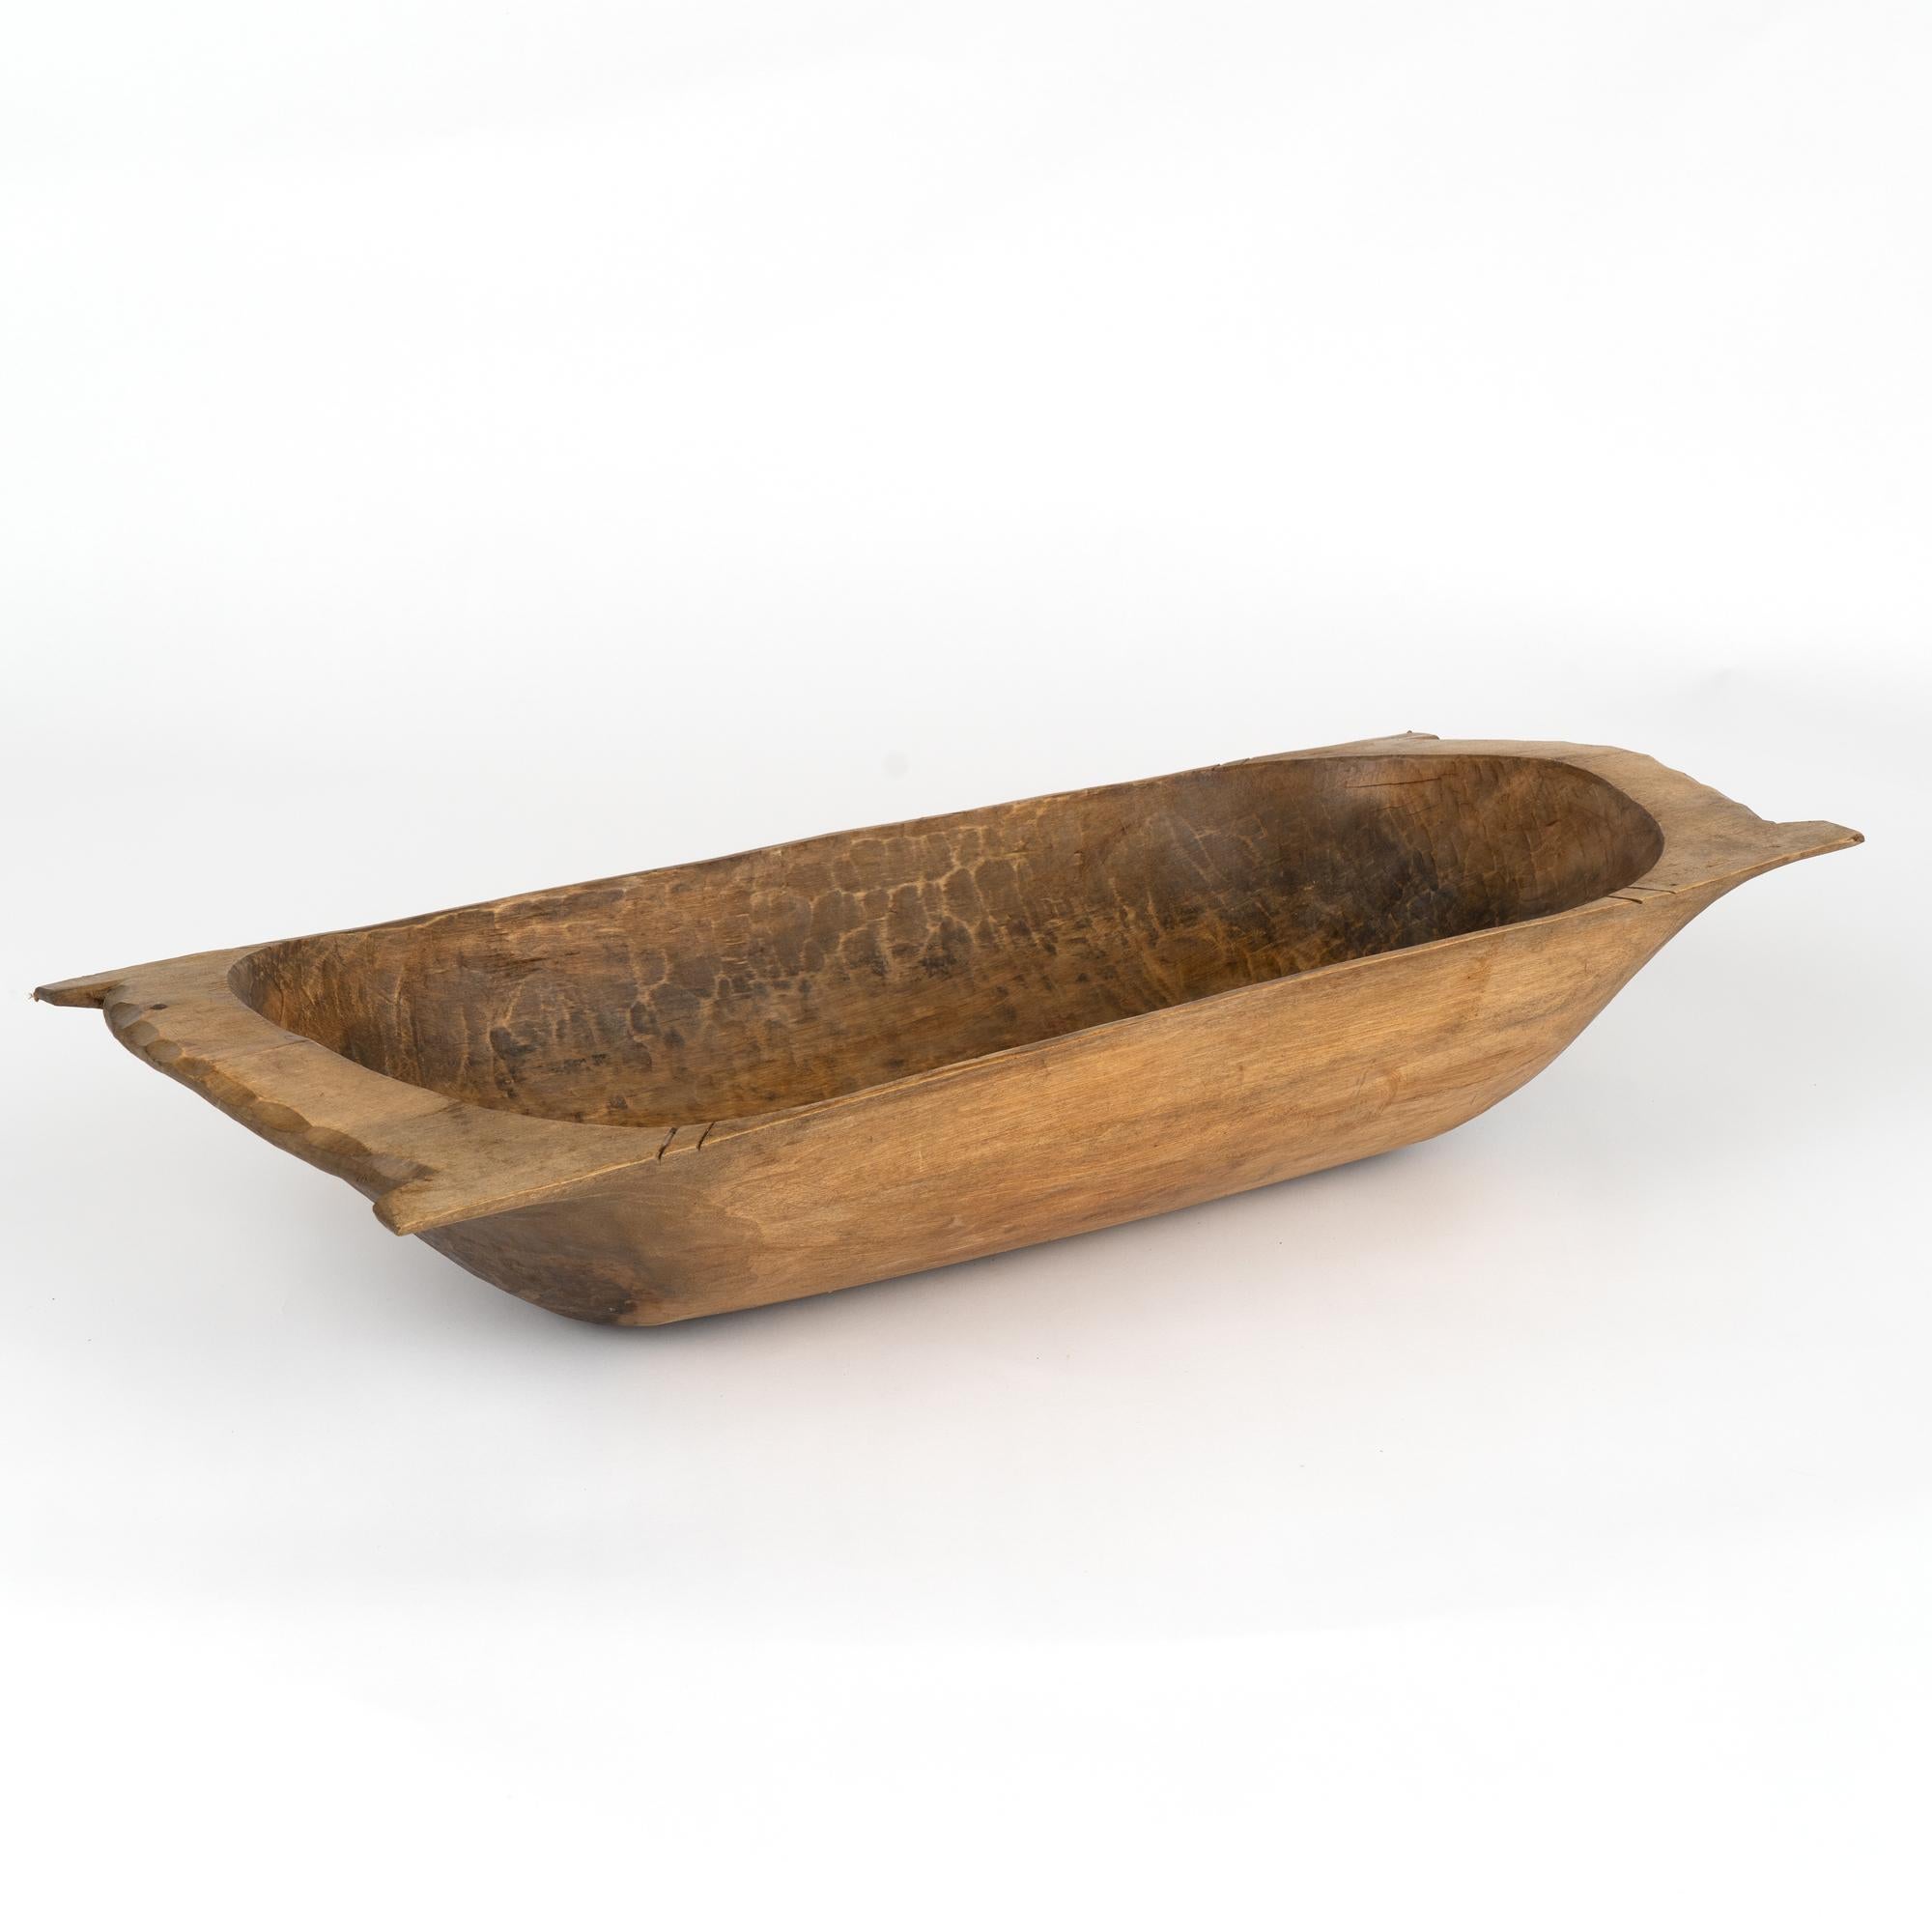 Antique, hand hewn, European country dough bowl / trencher featuring a rounded rectangular shape, tapered base and handles.
Old cracks/nicks, stains reflective of generations of use. Waxed, solid, stable and ready to be used as decorative